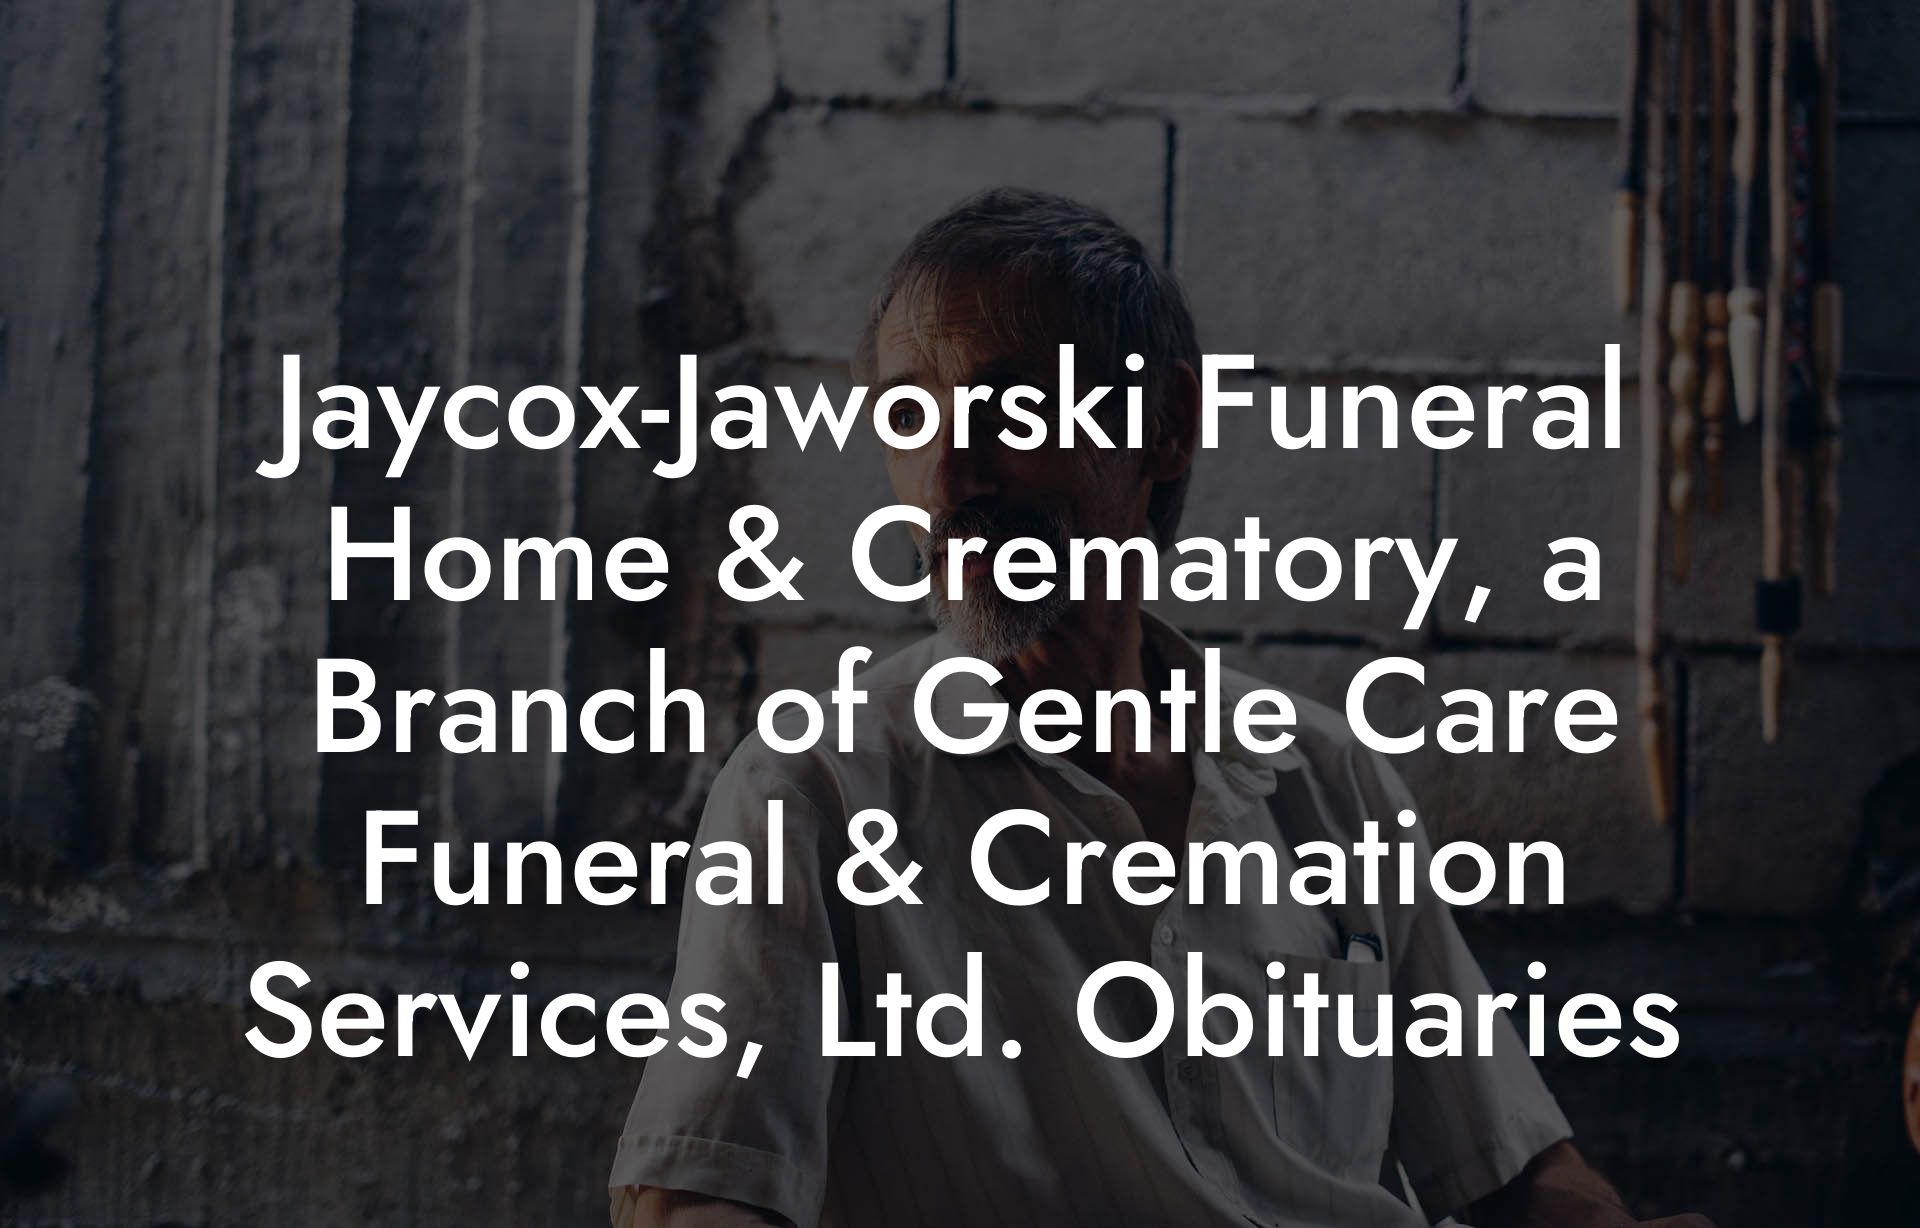 Jaycox-Jaworski Funeral Home & Crematory, a Branch of Gentle Care Funeral & Cremation Services, Ltd. Obituaries